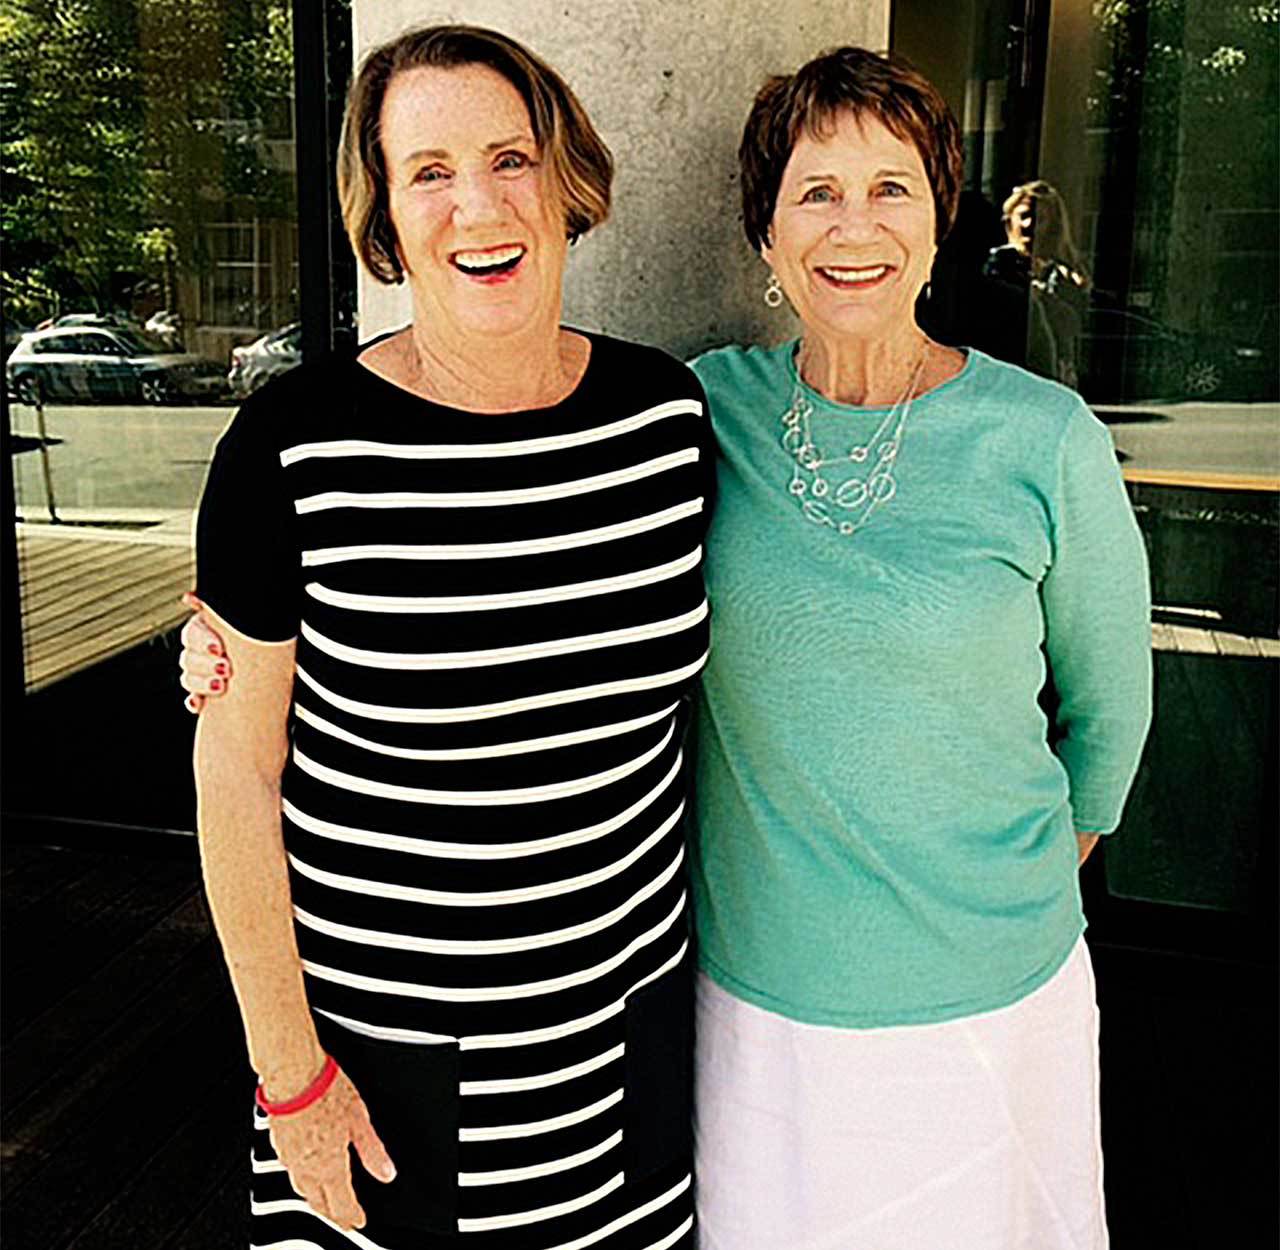 Sisters and Everett natives Leslie Mincks (left) and Madalyn Mincks, shown here in a recent photo, work to raise money to battle amyotrophic lateral sclerosis, or Lou Gehrig’s disease. Leslie Mincks, 70, was diagnosed with ALS in 2014. (Courtesy of Madalyn Mincks)